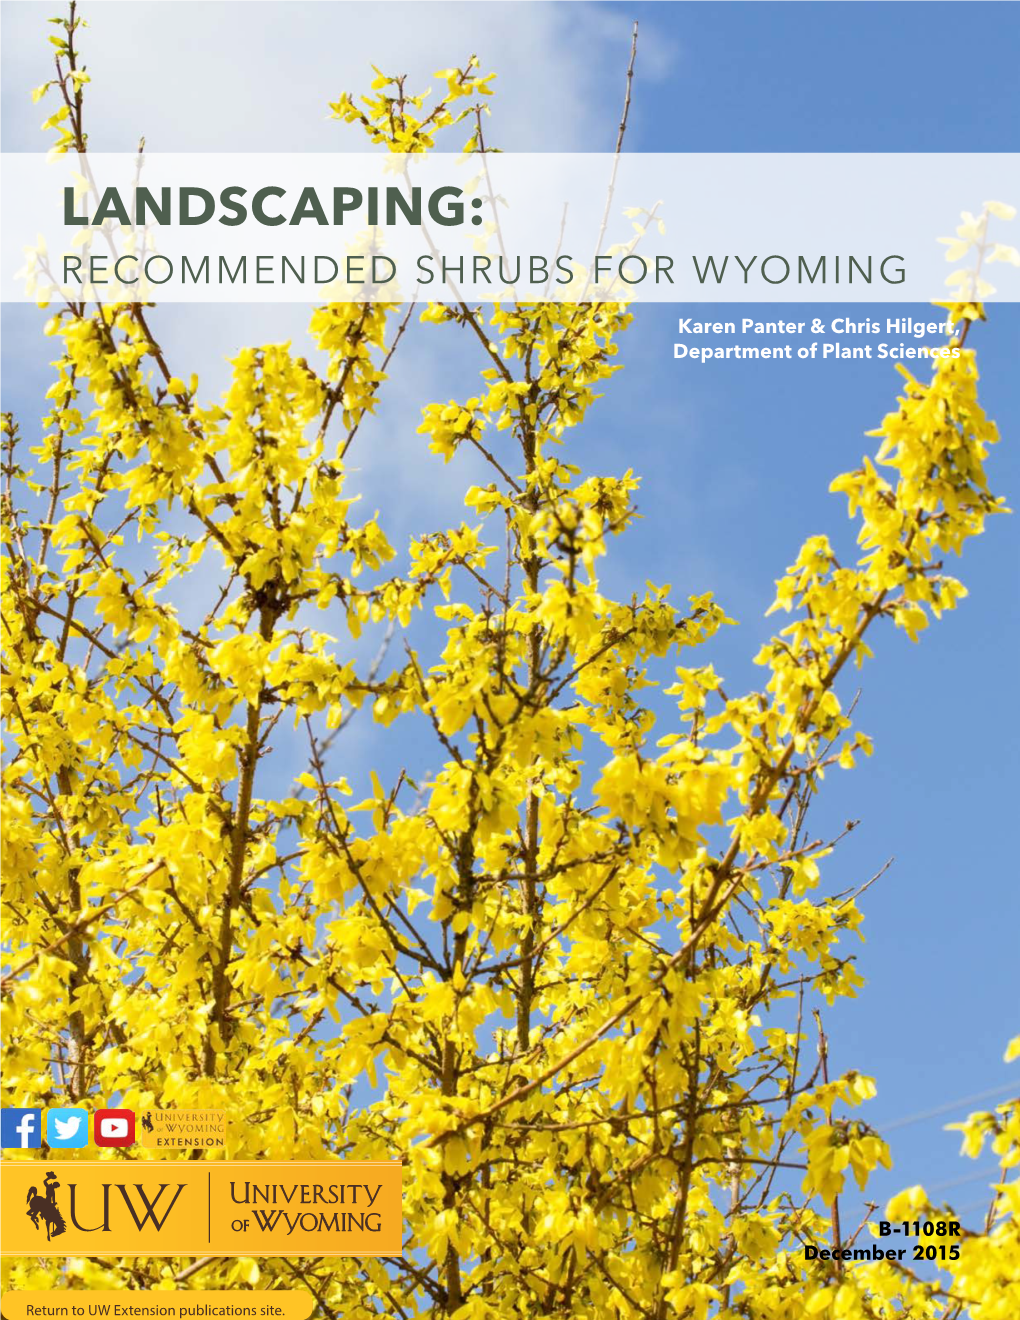 Landscaping: Recommended Shrubs for Wyoming